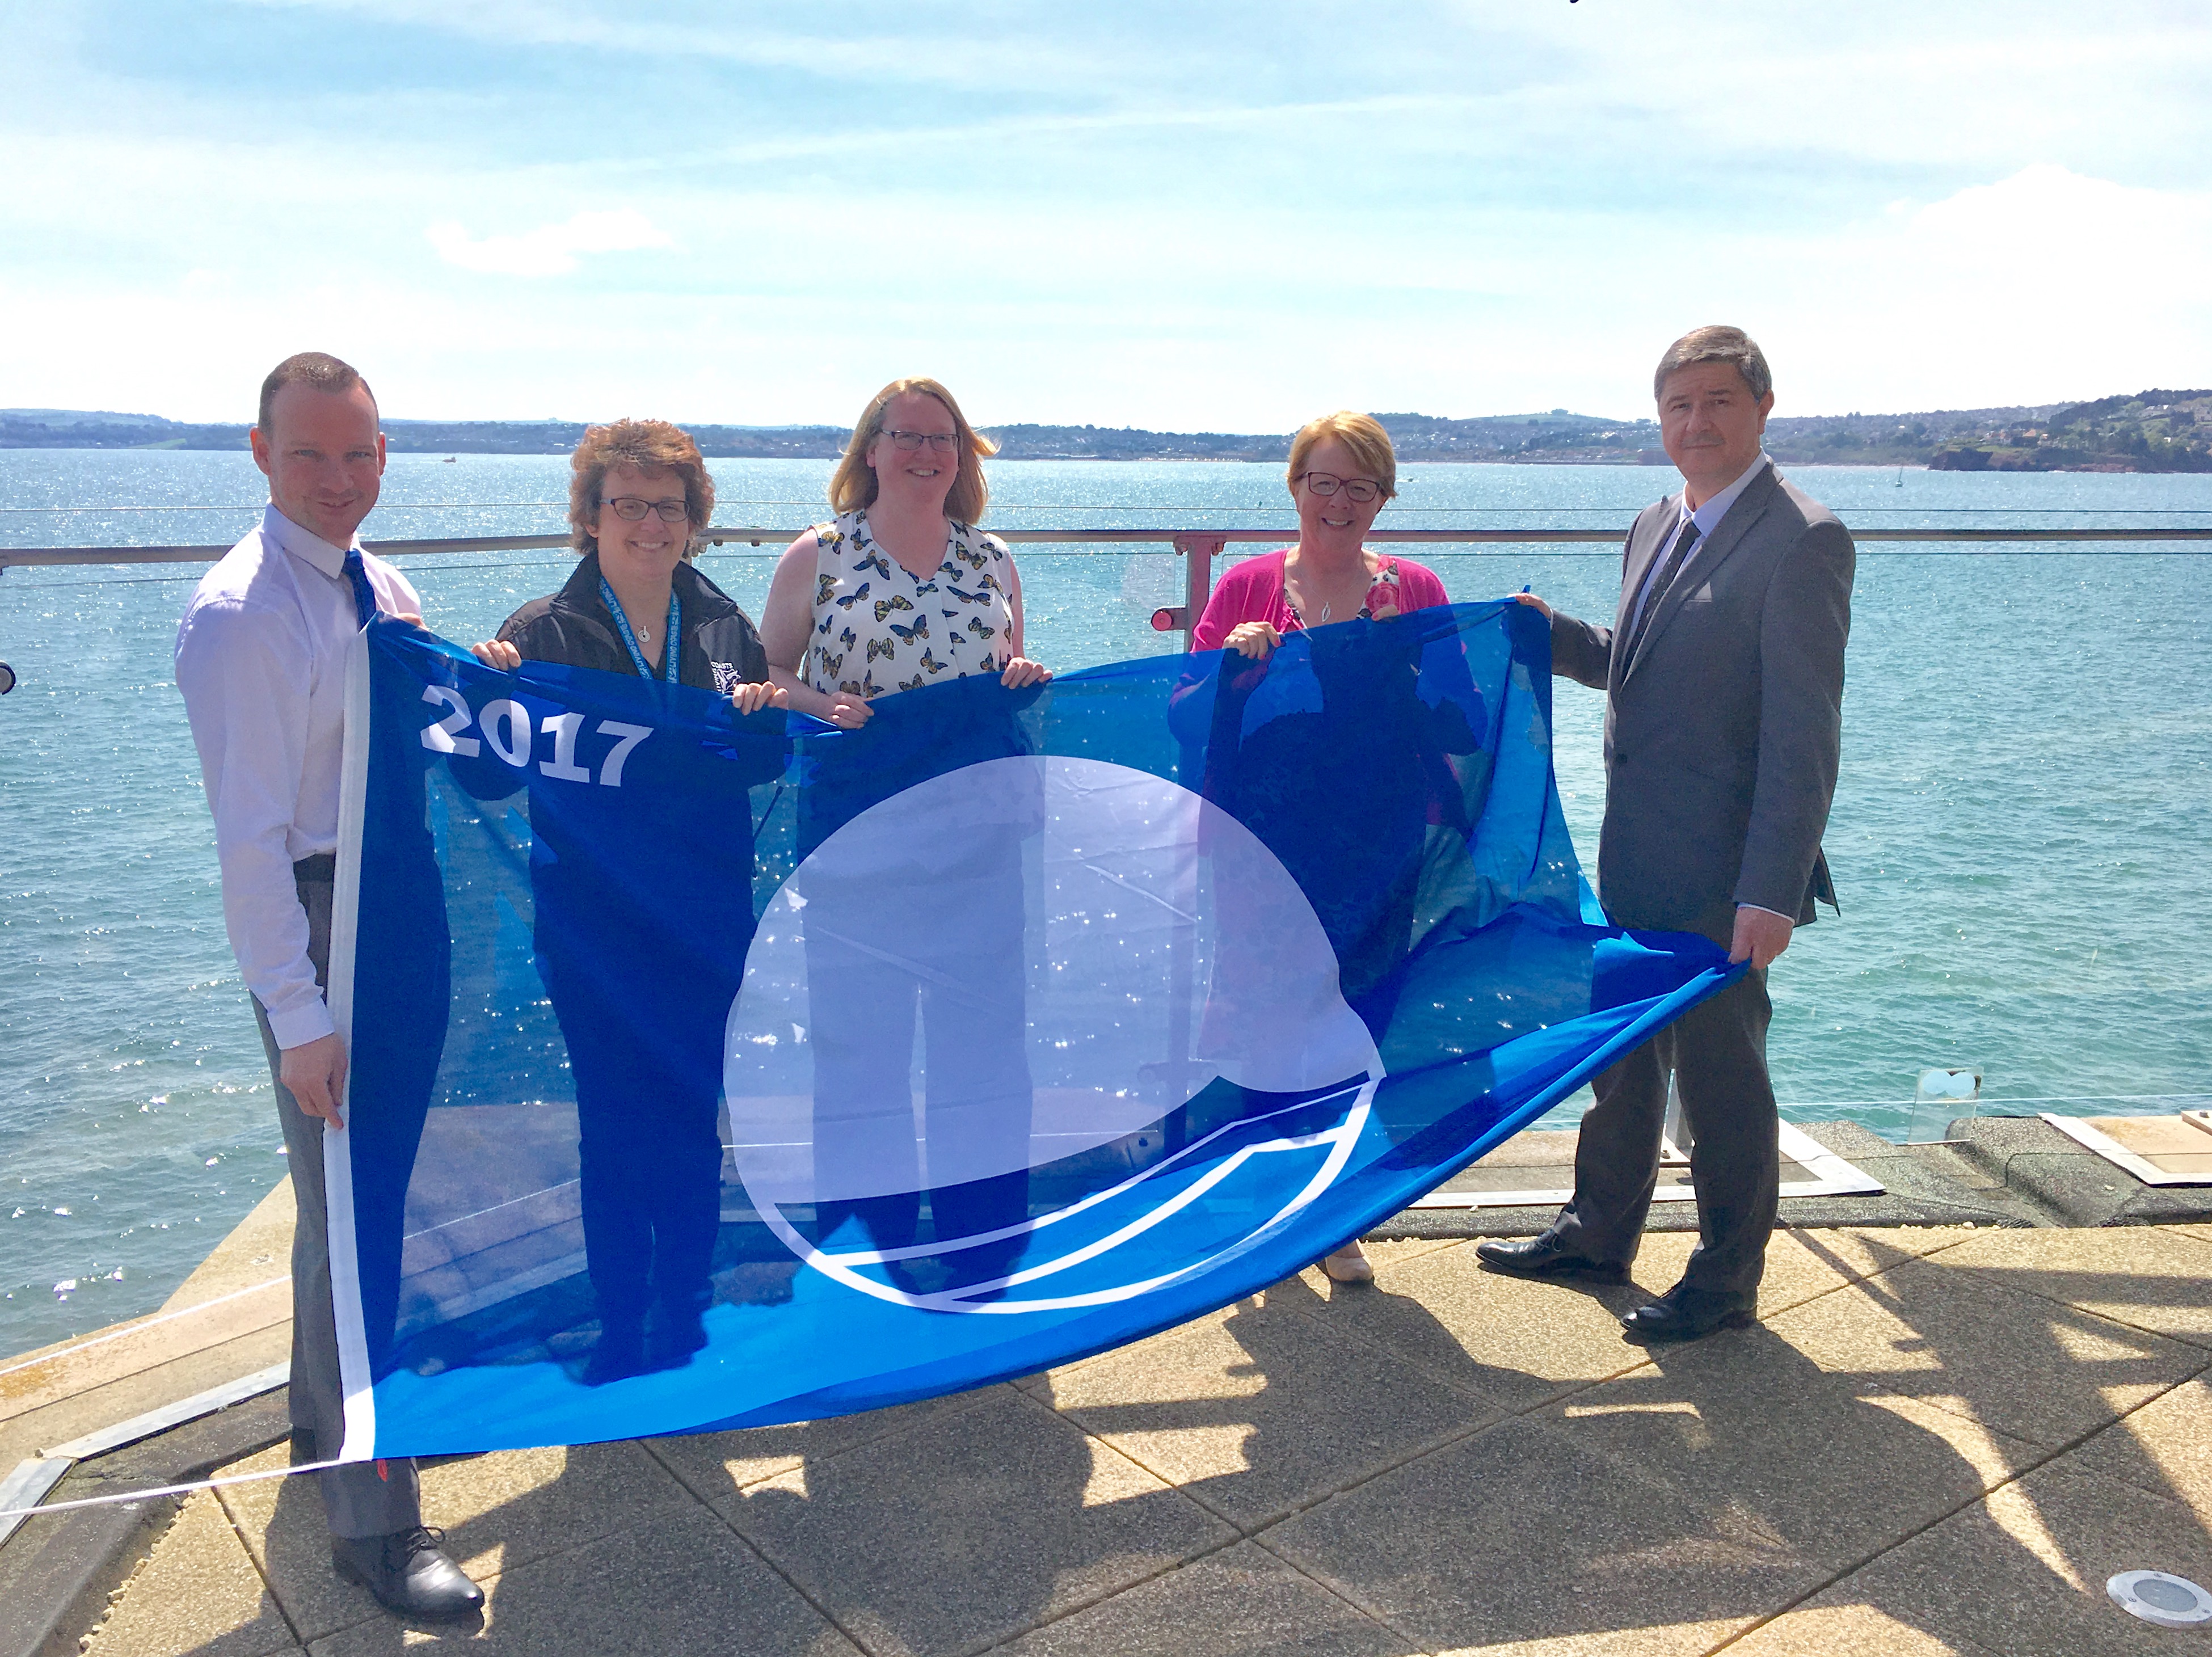 Left to right: Simon Wallace, Operations Manager for Beaches & Coastline, Torbay Council; Claire Rugg, Operations Manager, Living Coasts; Pippa Craddock, Director of Marketing & Development for Living Coasts; Kevin Mowat, Executive Head of Business Services, Torbay Council